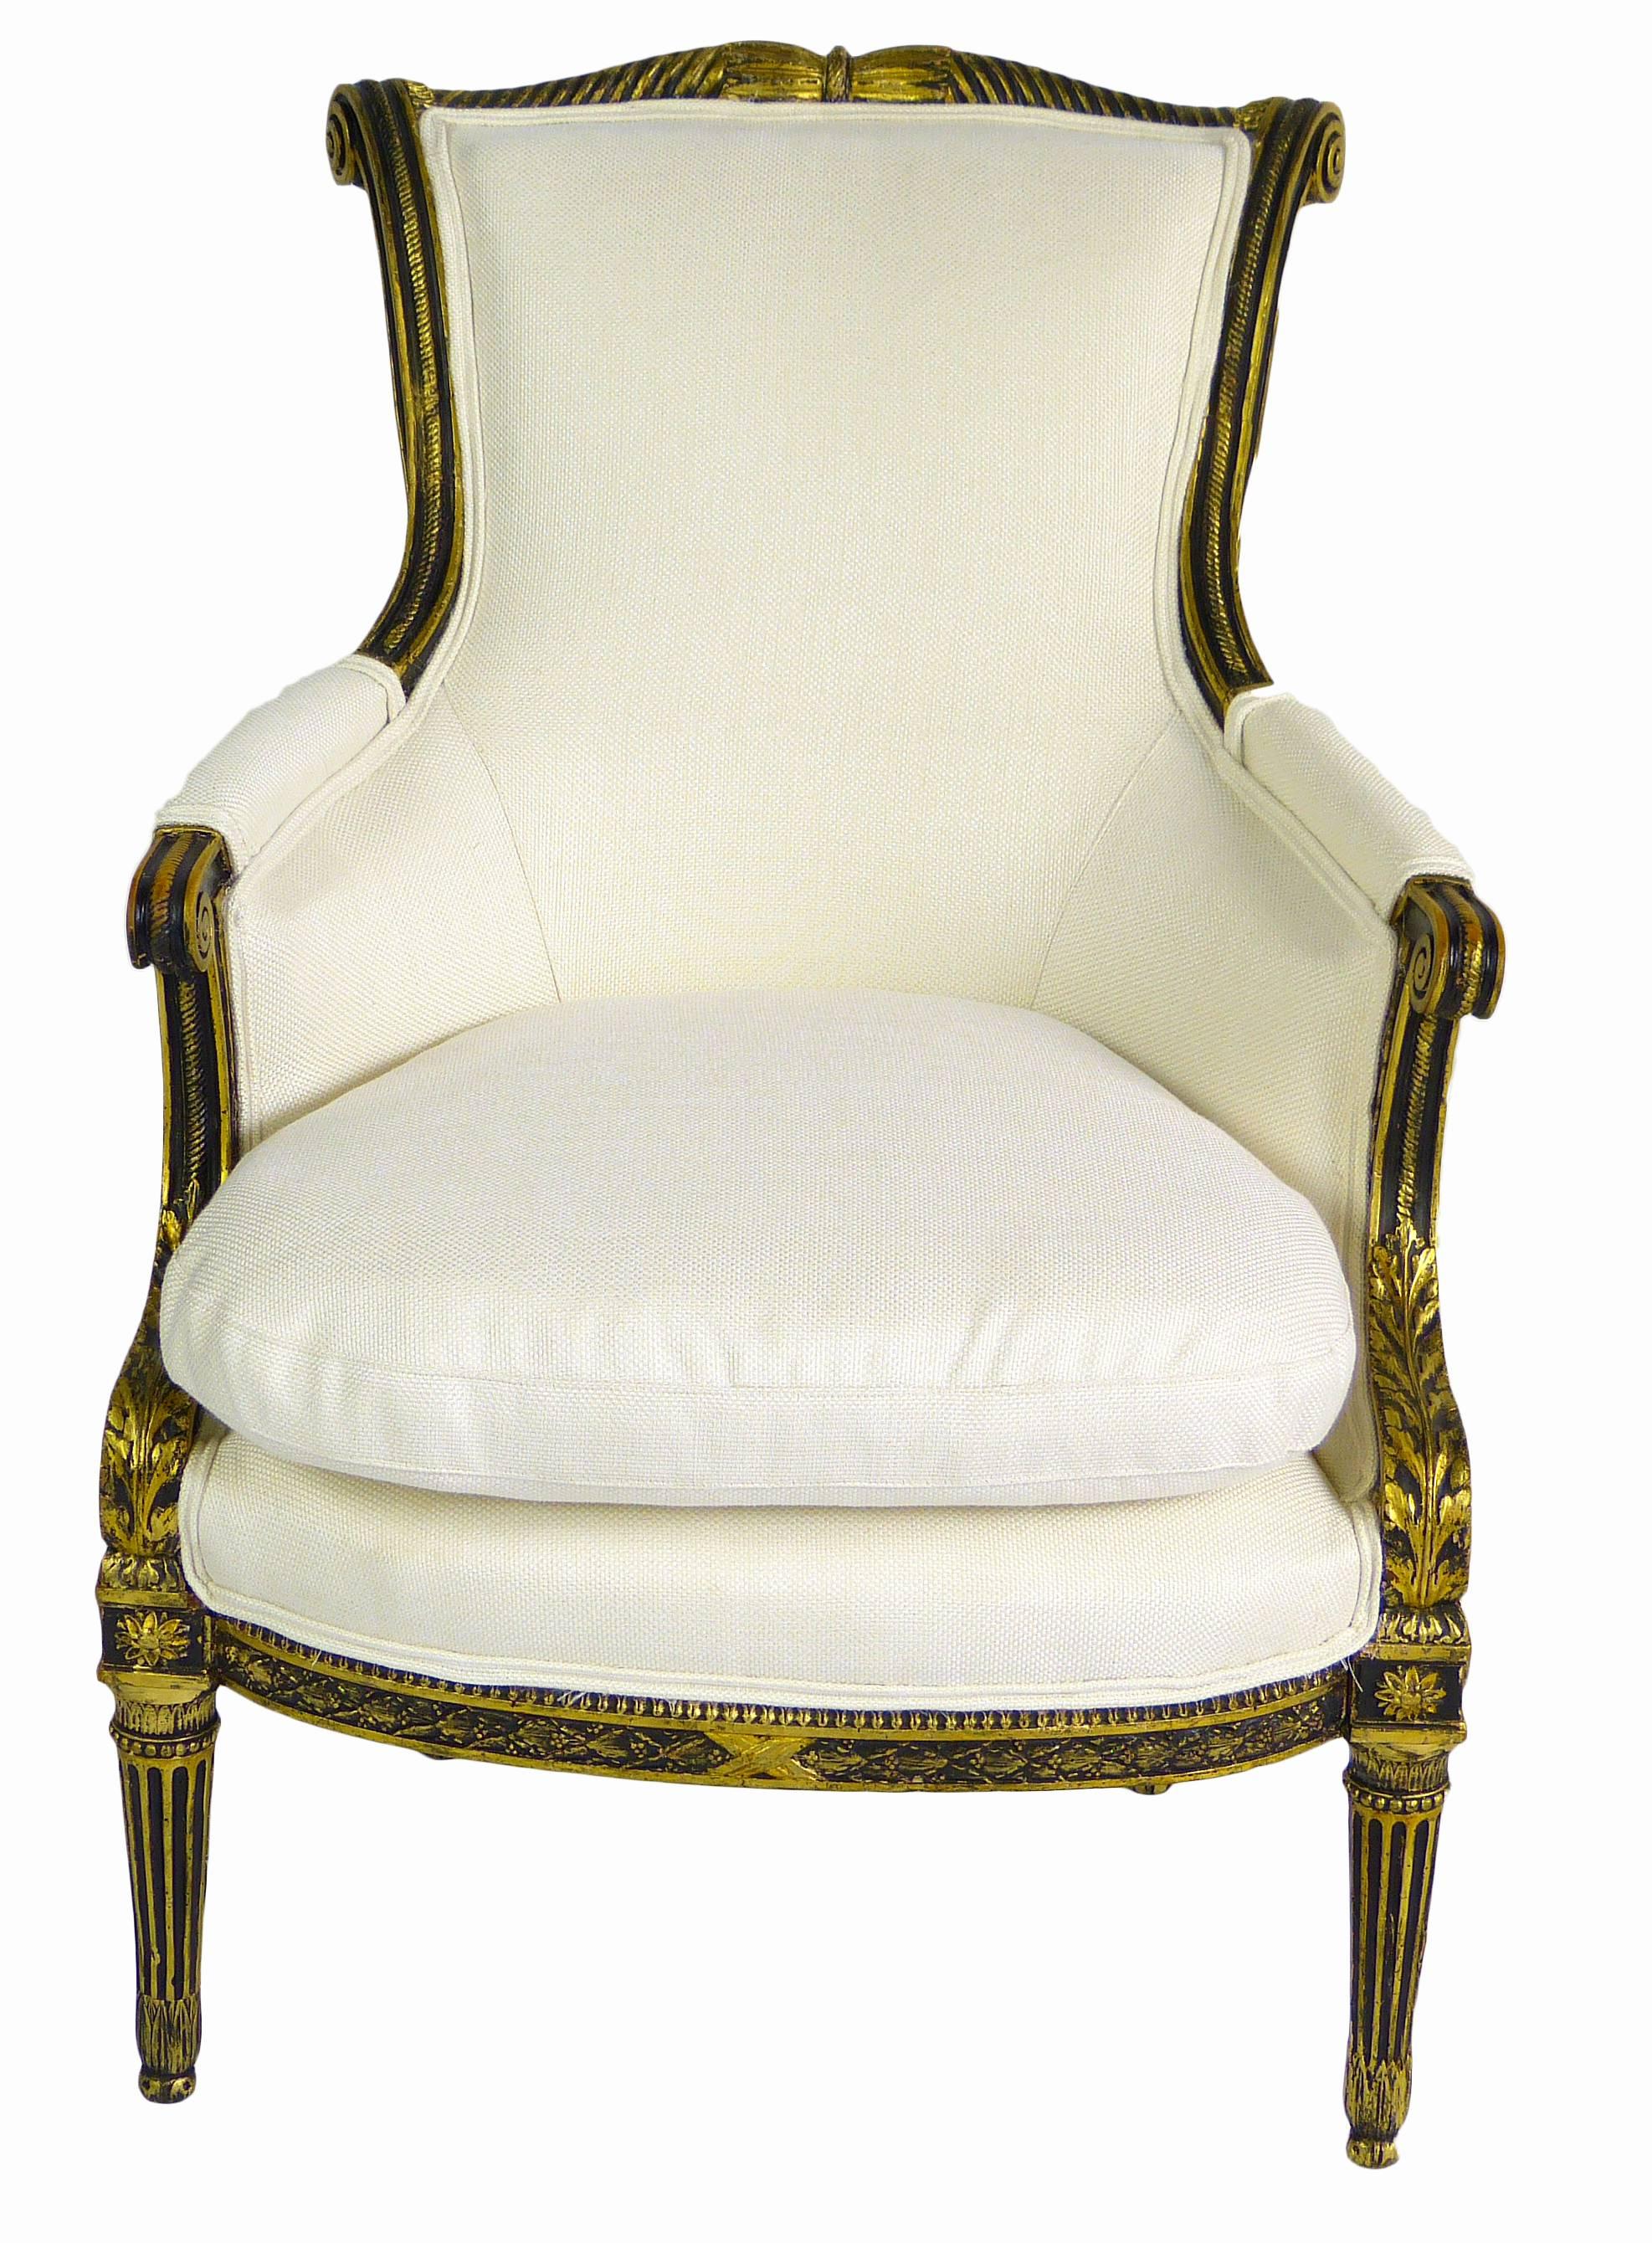 Fine French Louis XVI fauteuil dating to the last quarter of the 18th century bearing the stamp of François-Claude Menant (1757-1793) who was declared Master on the 19th of September of 1786. The fauteuil bears his characteristic stamp FC MENANT as